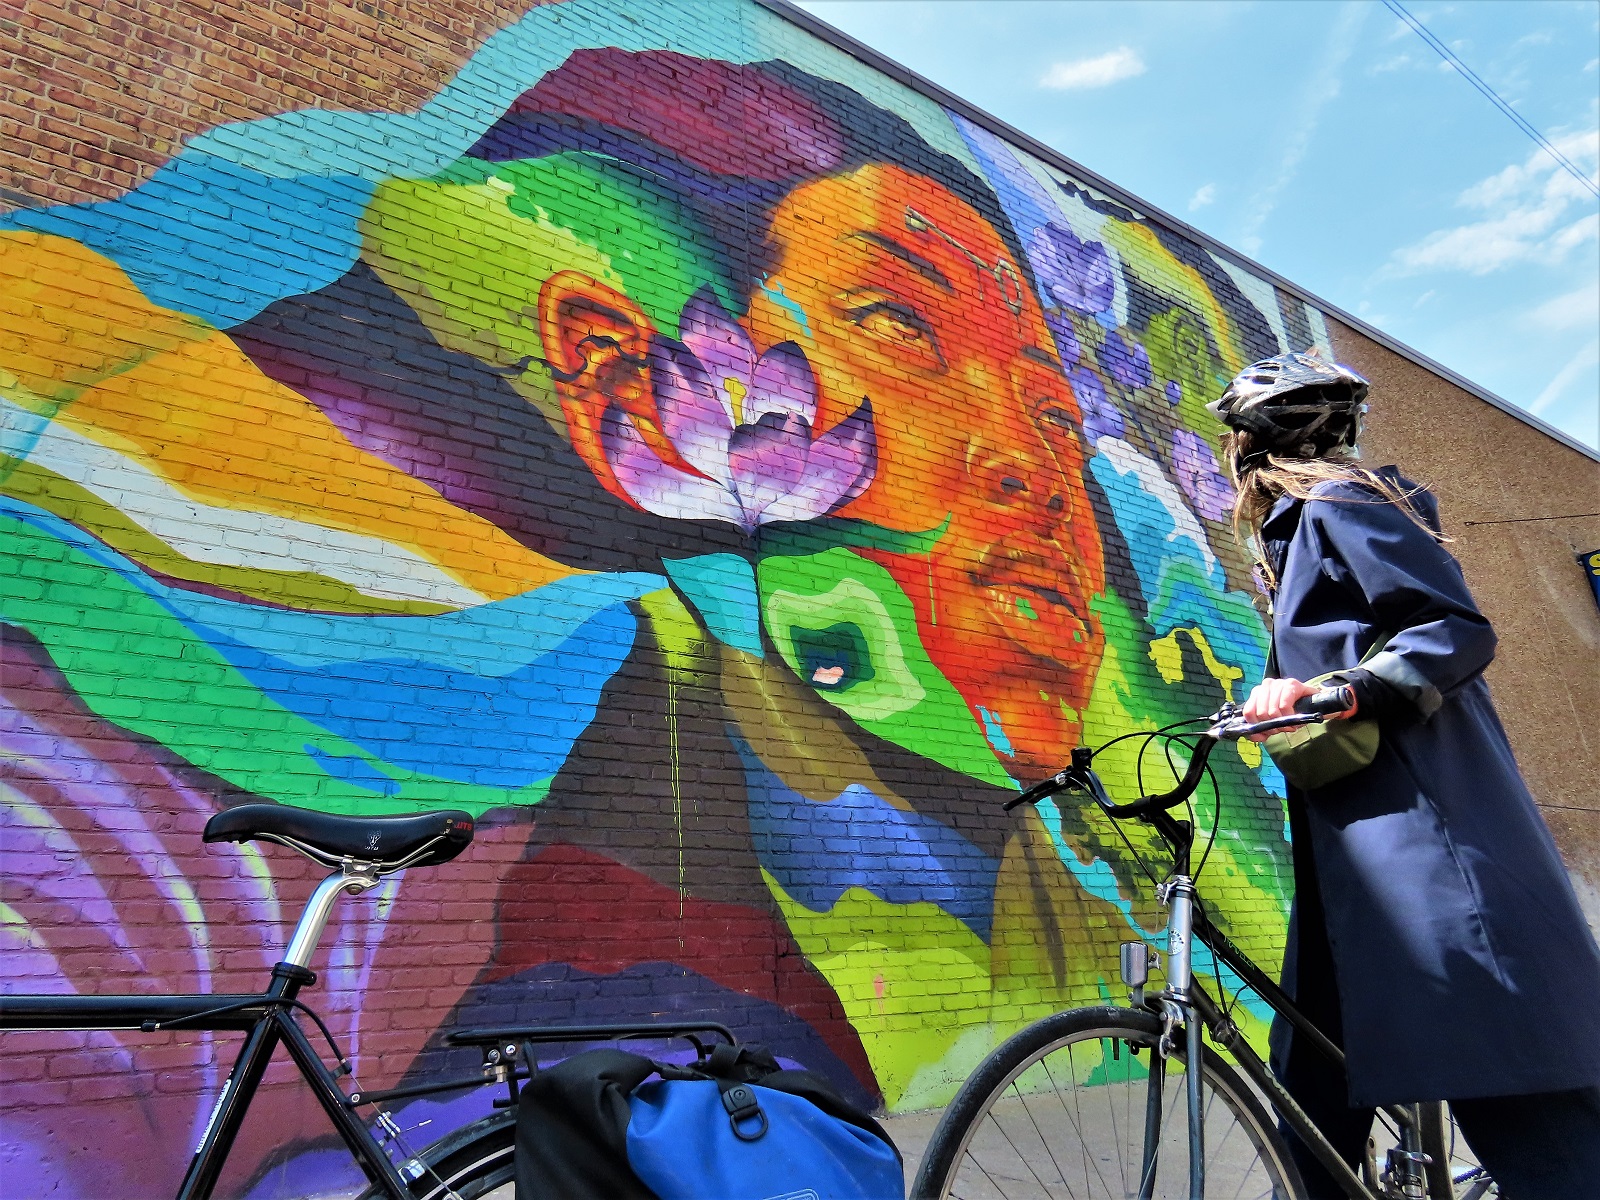 A CBA rider getting a close look at a bright colored mural of a Black woman looking into the distance.